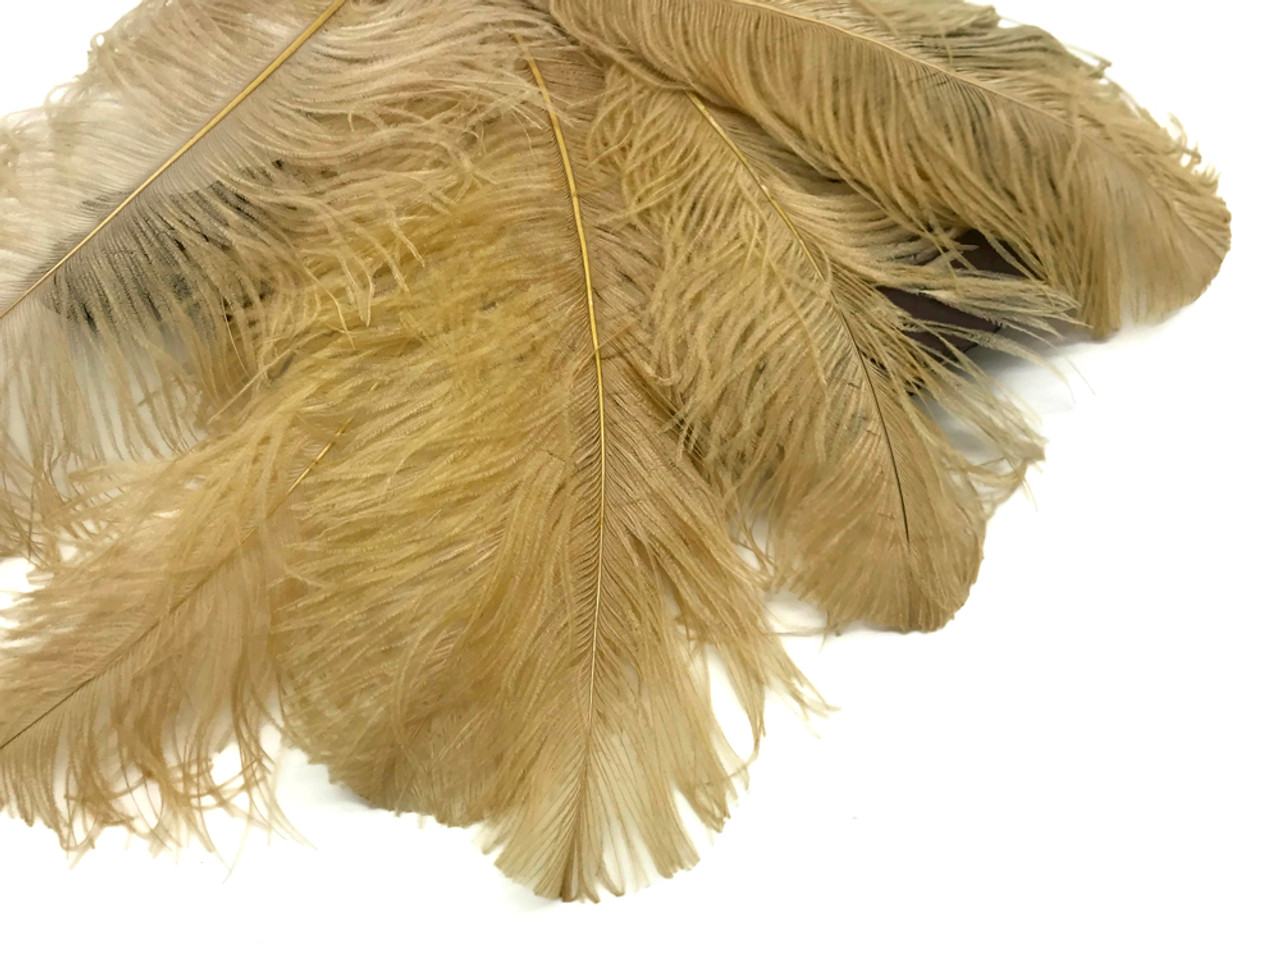 Ostrich Feather Spad Plumes 16-20 (Gold)